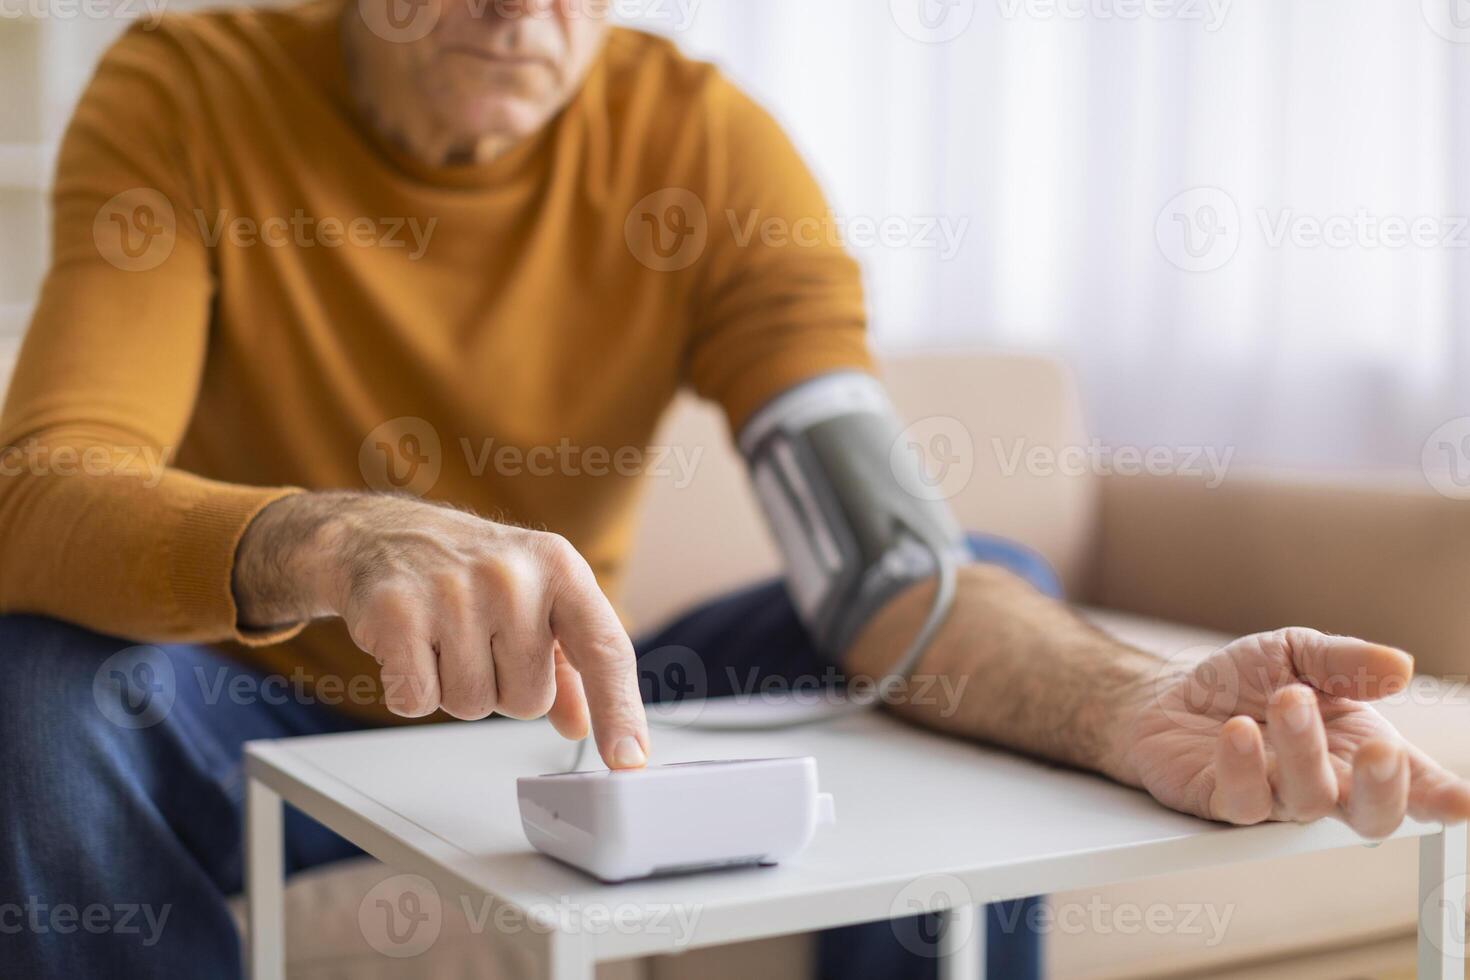 Man measuring blood pressure with digital monitor photo